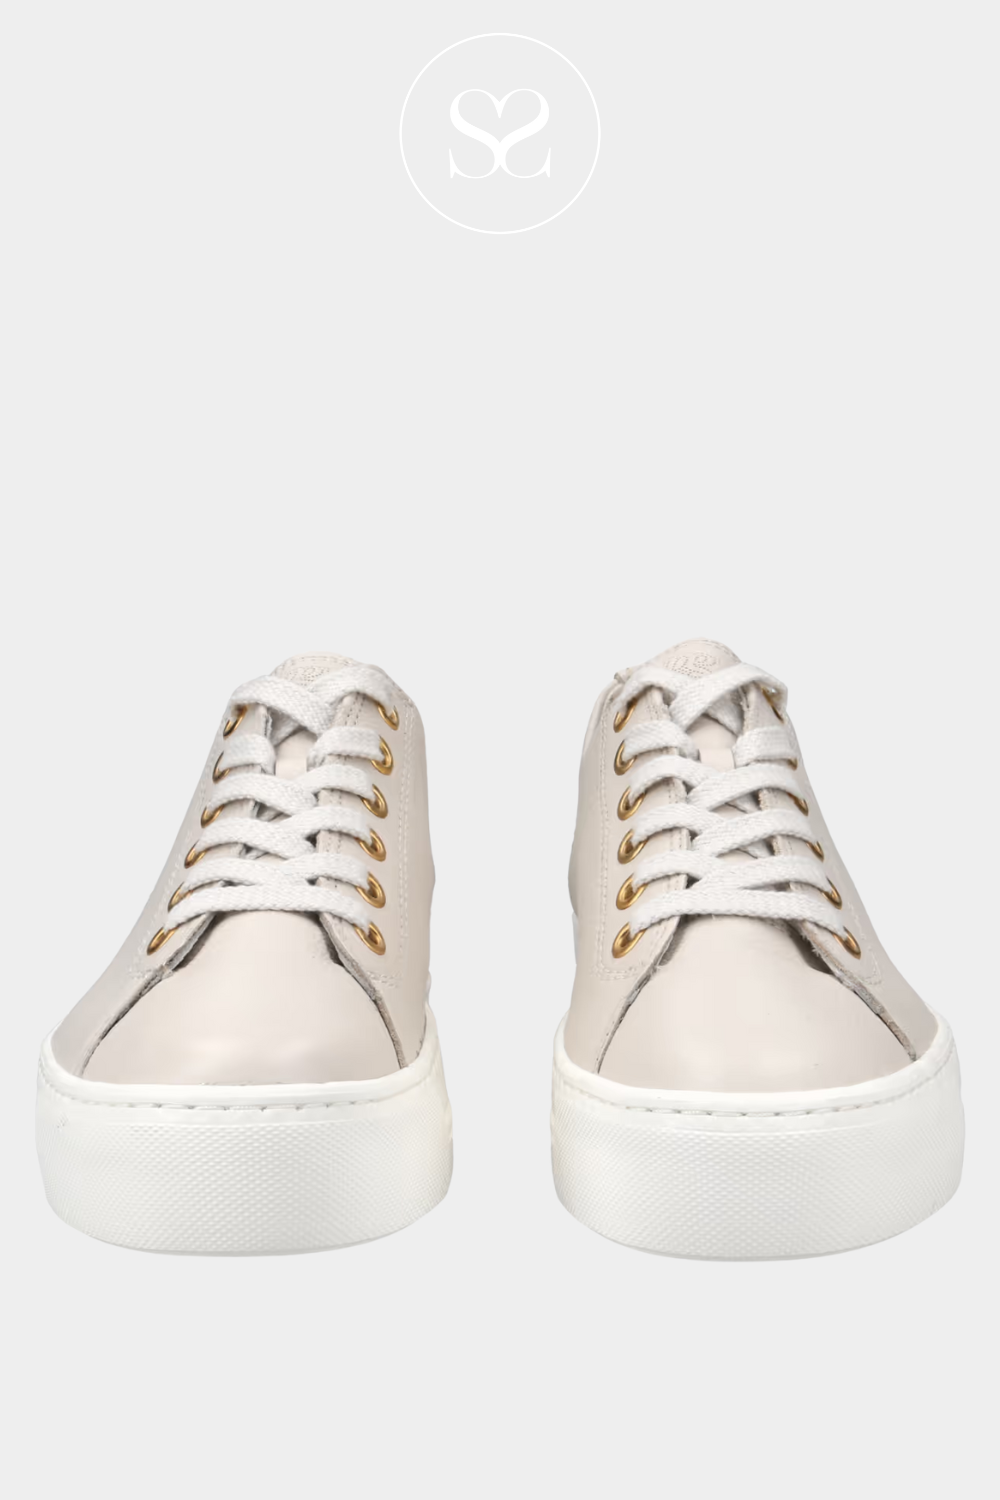 PAUL GREEN 4790 CREAM FLATFORM LACED TRAINERS WITH GOLD EYELETS